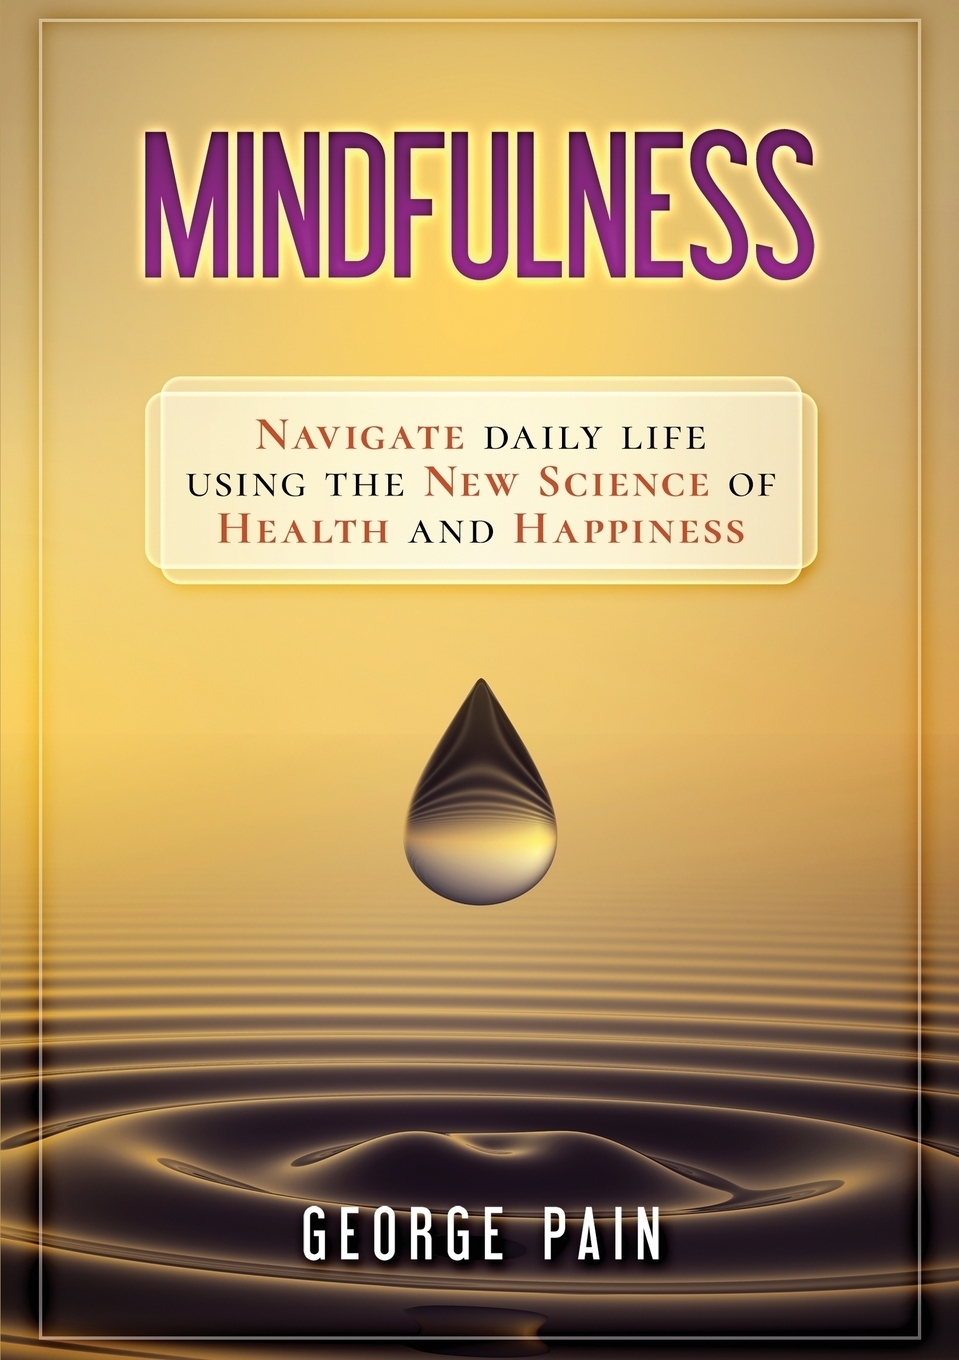 Mindfulness. Navigate daily life using the new science of health and happiness